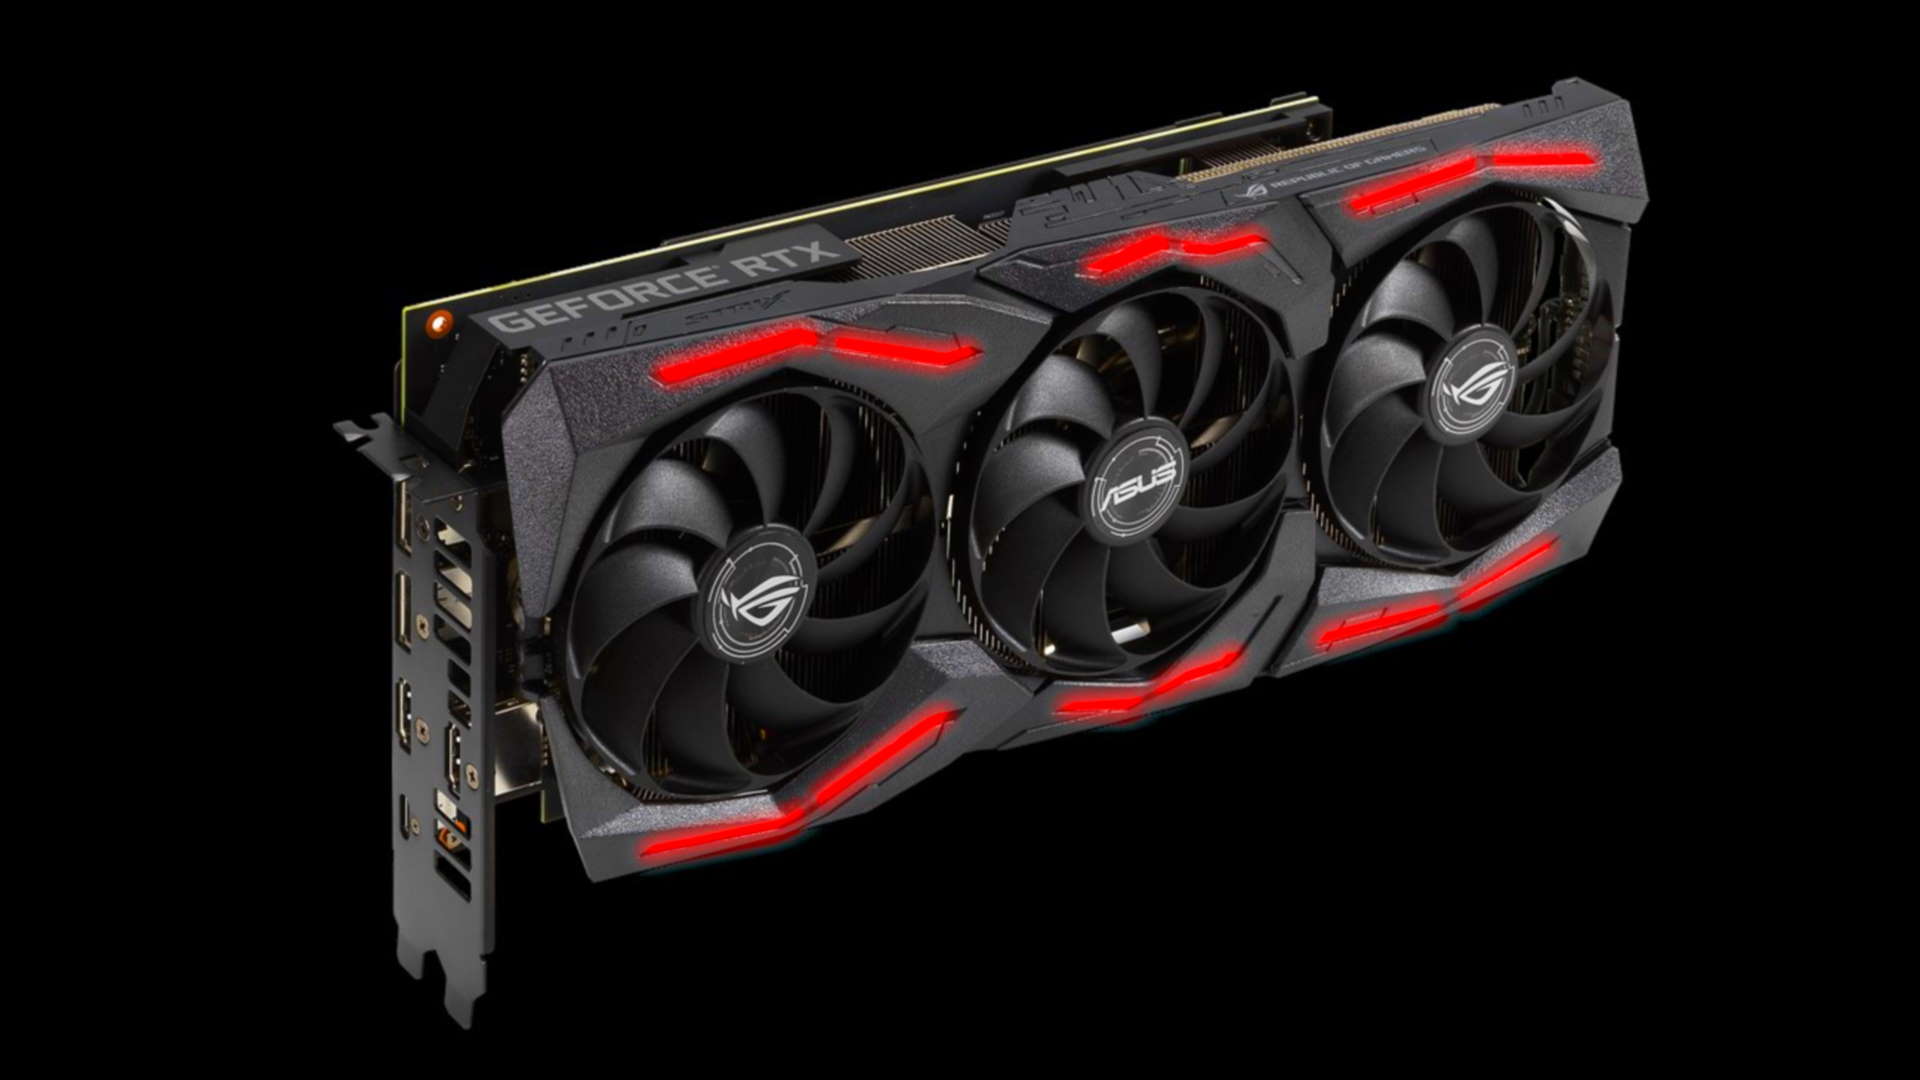 Nvidia GeForce GPU refresh on the cards Eternal and Asus list 8GB RTX 2060 | PCGamesN